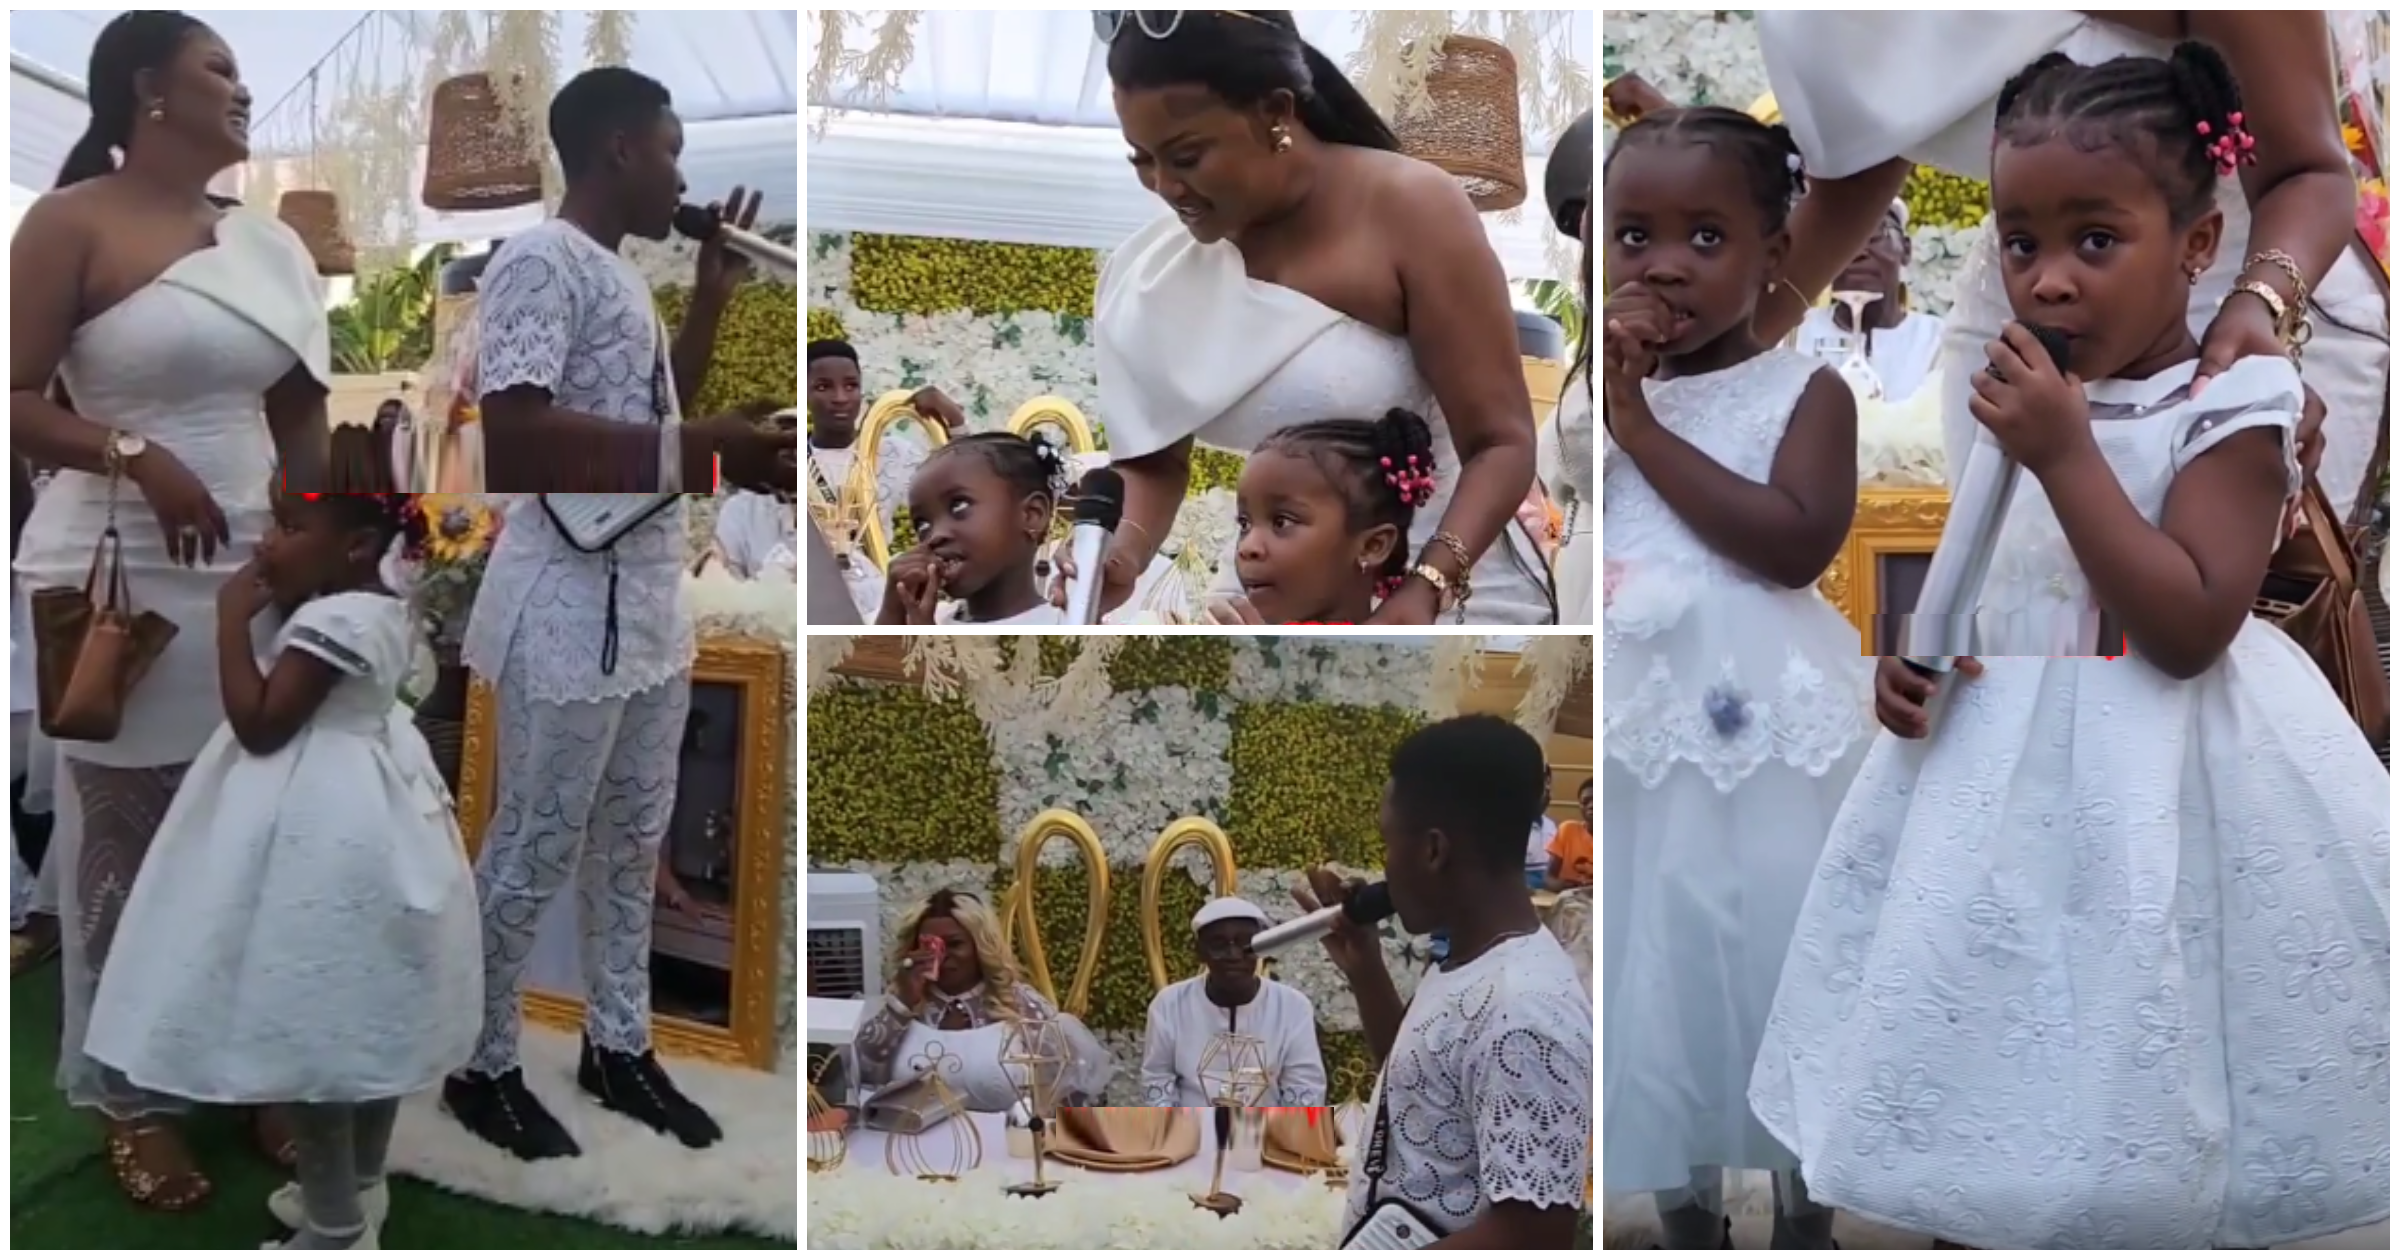 Baby Maxin and her brother get their grandmother teary as they celebrate her at 65th birthday party